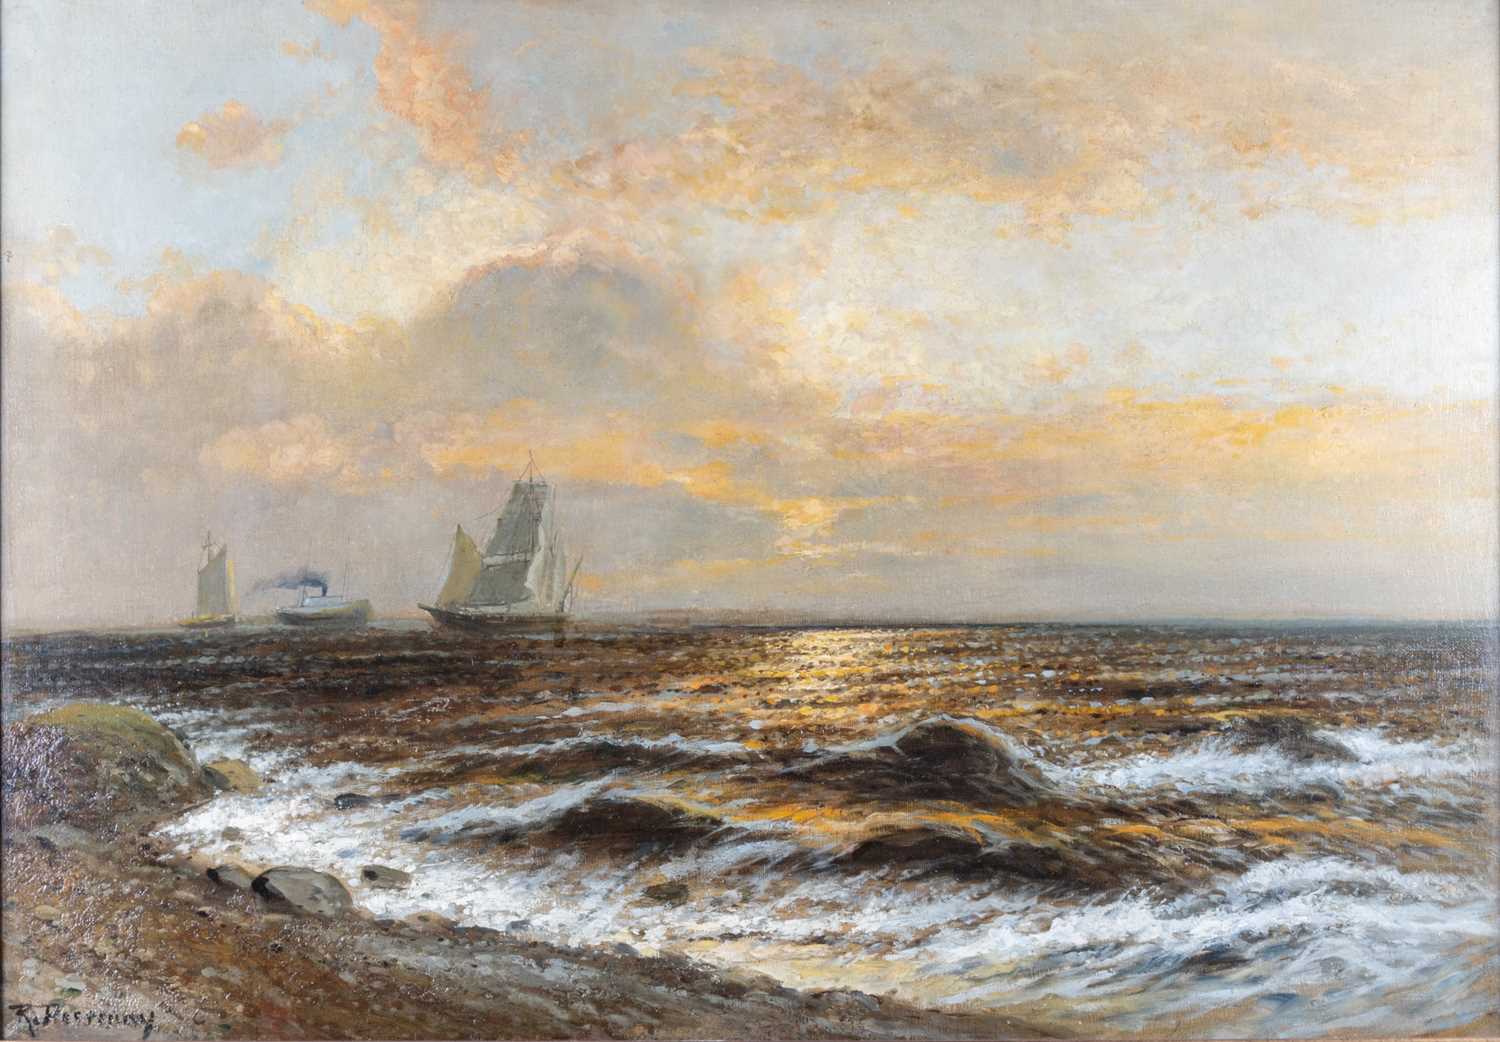 R RESSULLAY? (LATE 19TH CENTURY) SHIPS AND A STEAMER OFF THE COAST AT SUNSET